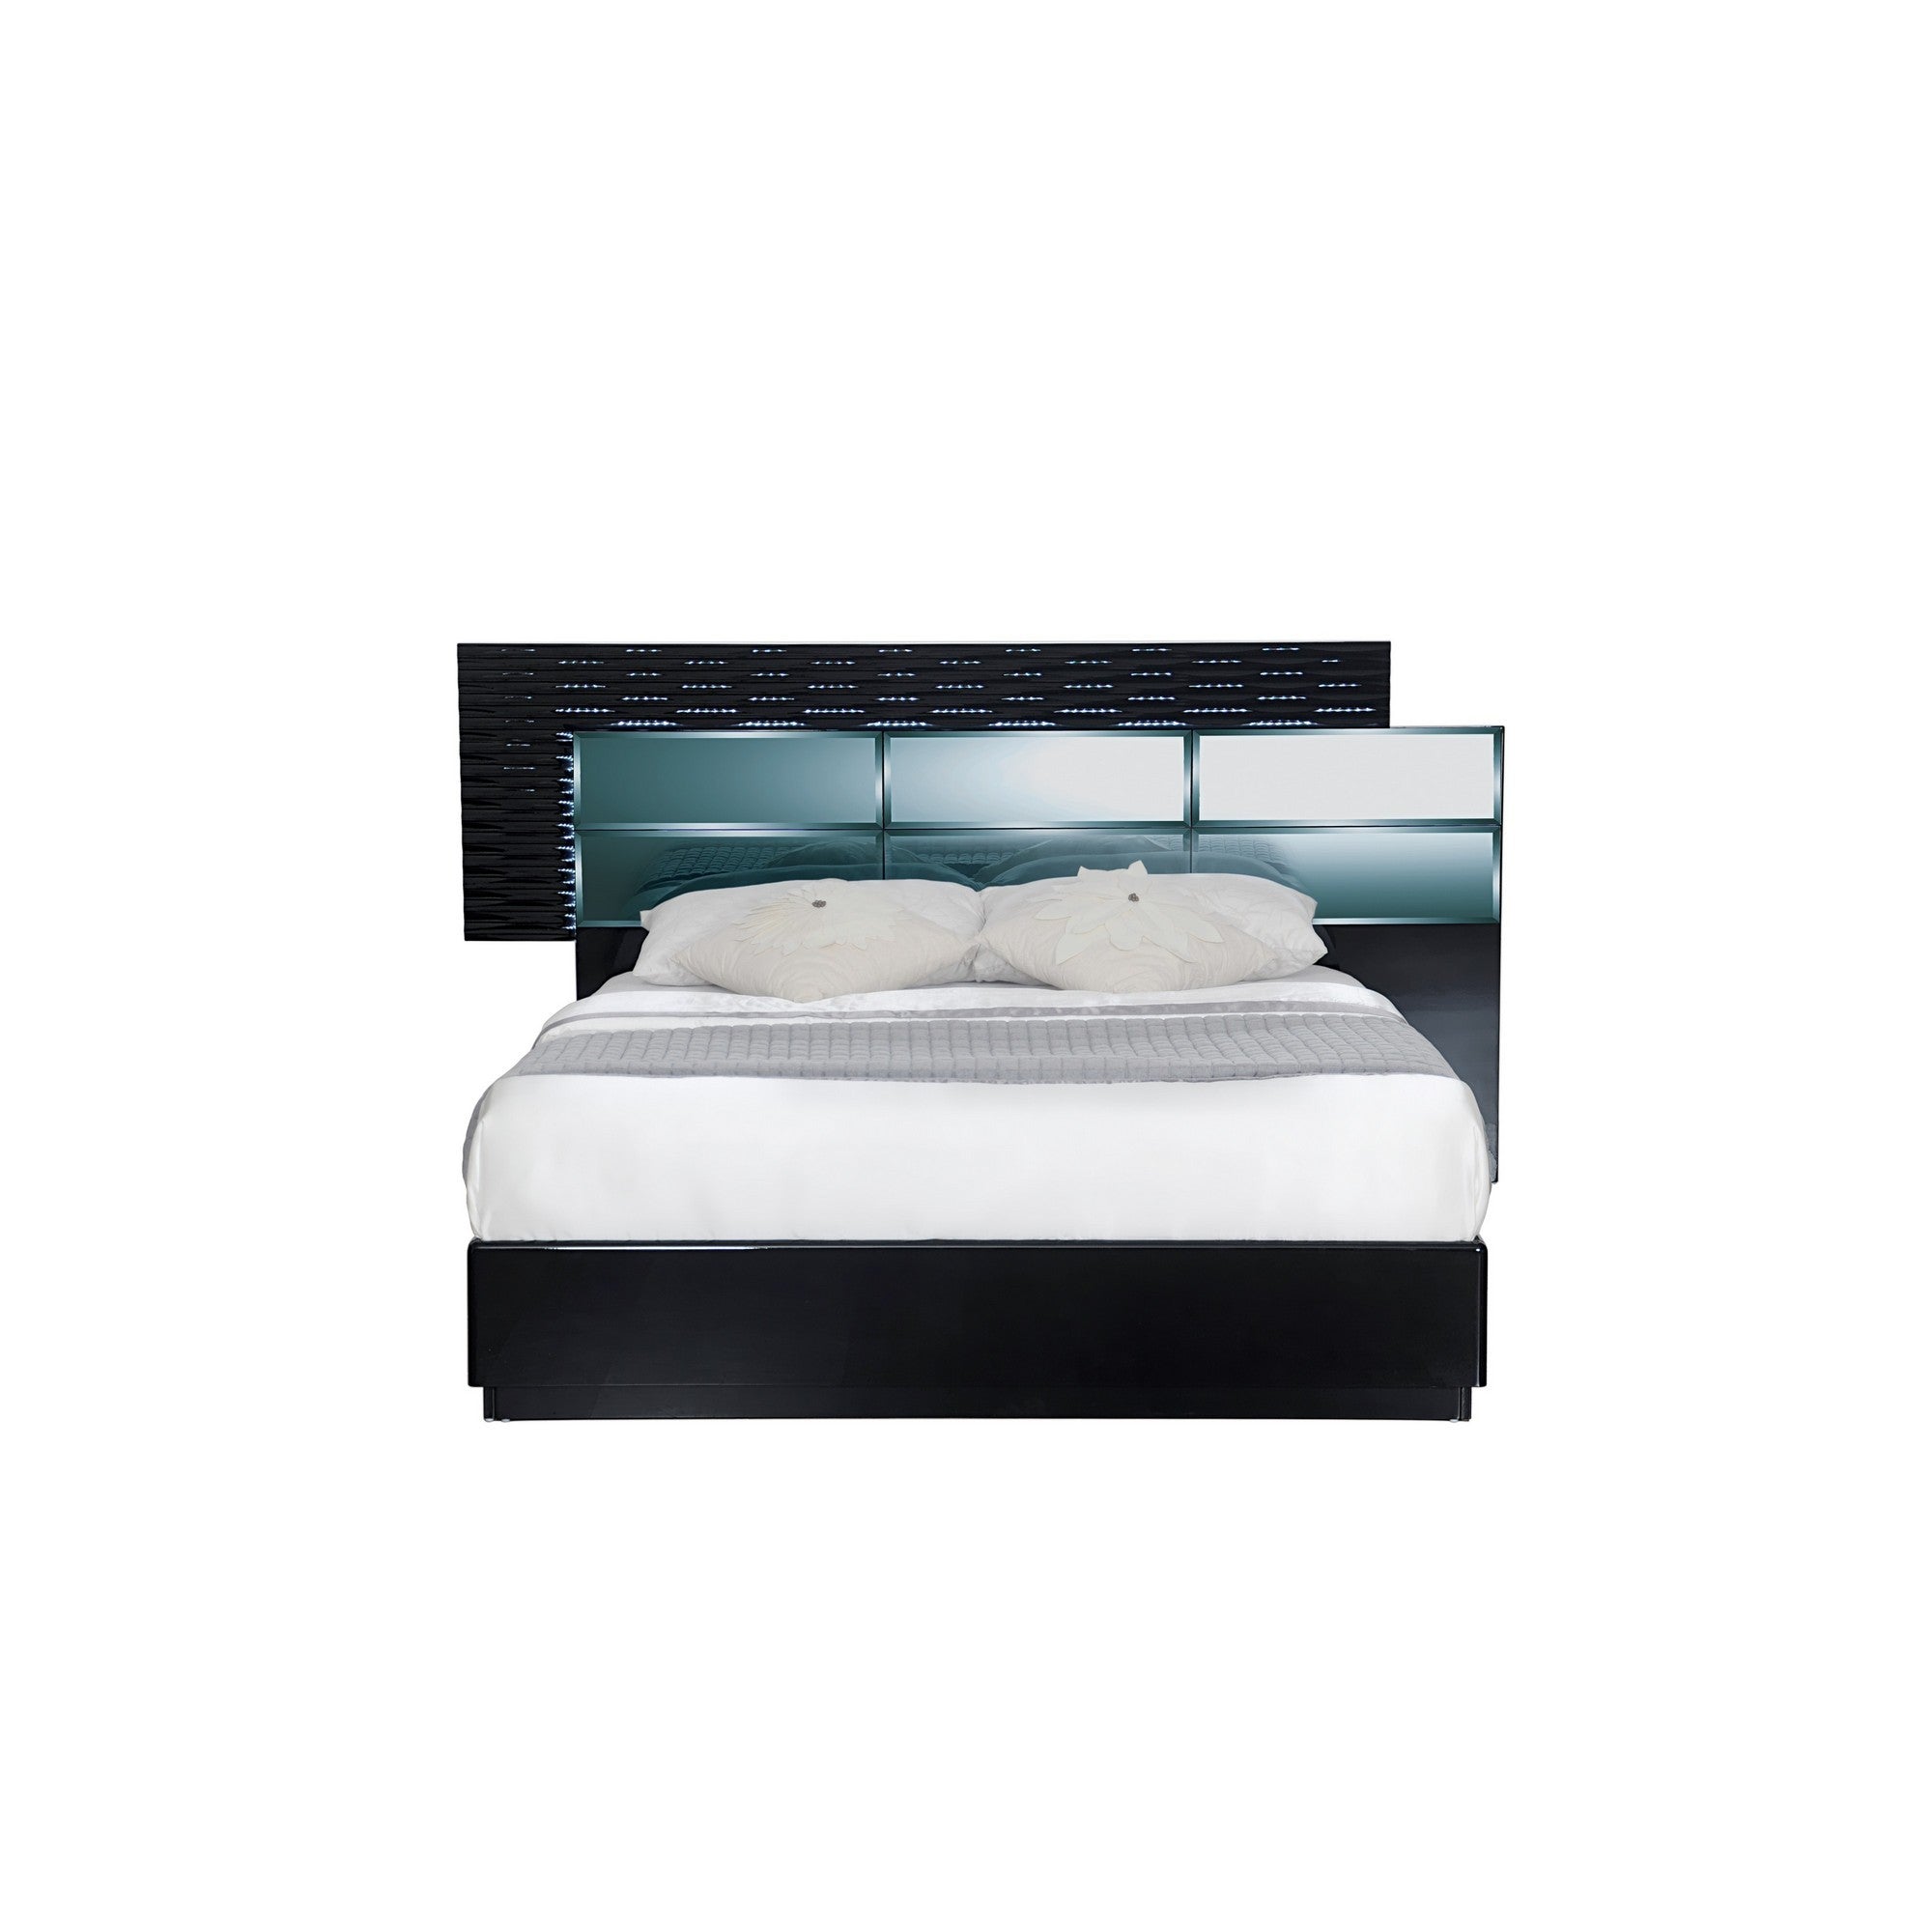 Modern Black Queen Bed with Headboard  LED lightning  Smoked Mirrored Panels Default Title